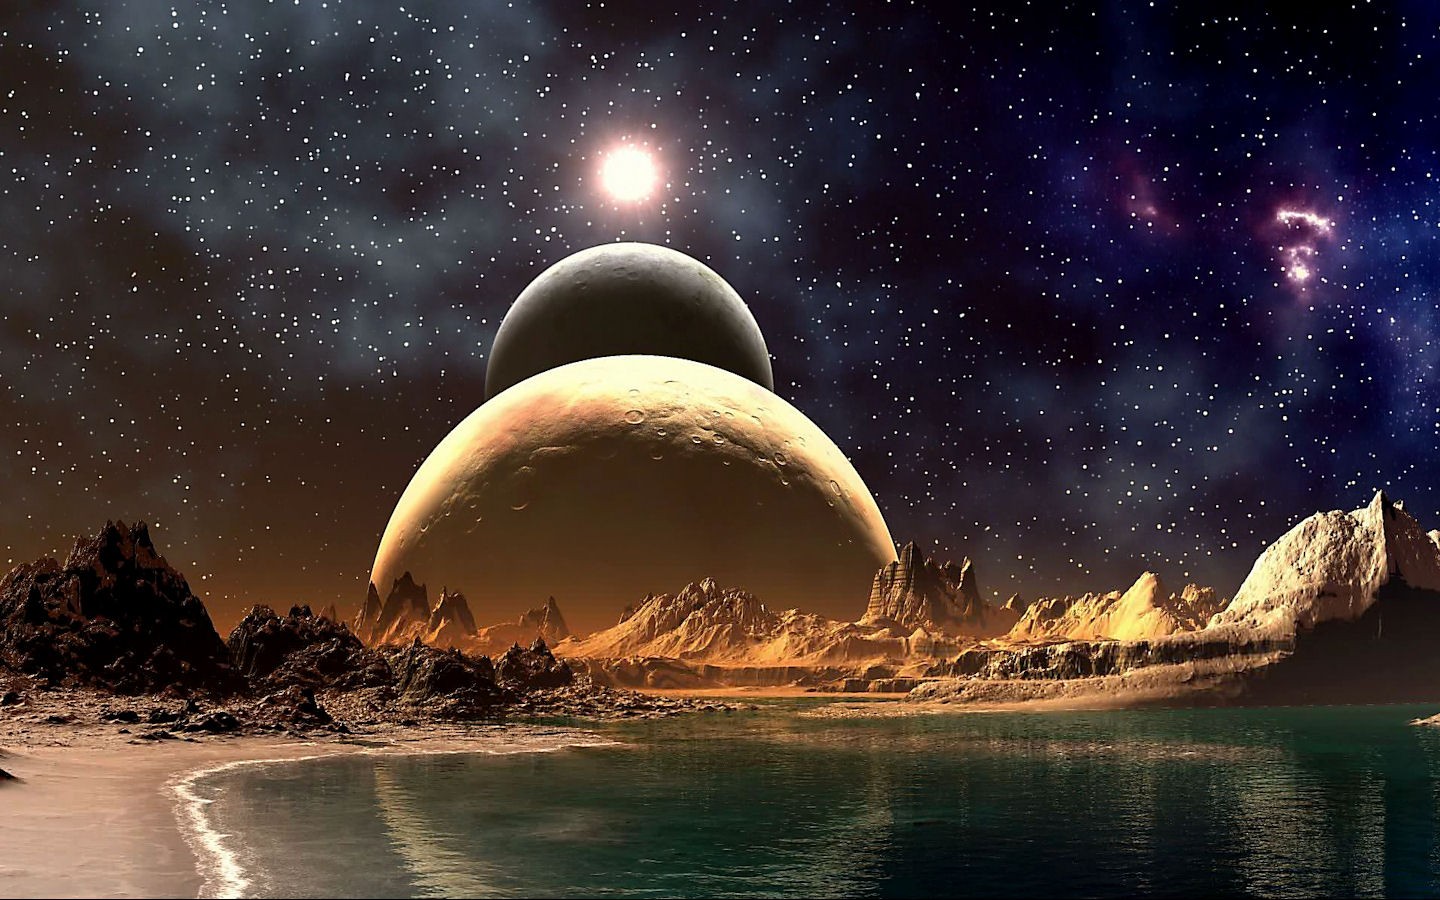  planets science fiction photomanipulations fresh new hd wallpaper best